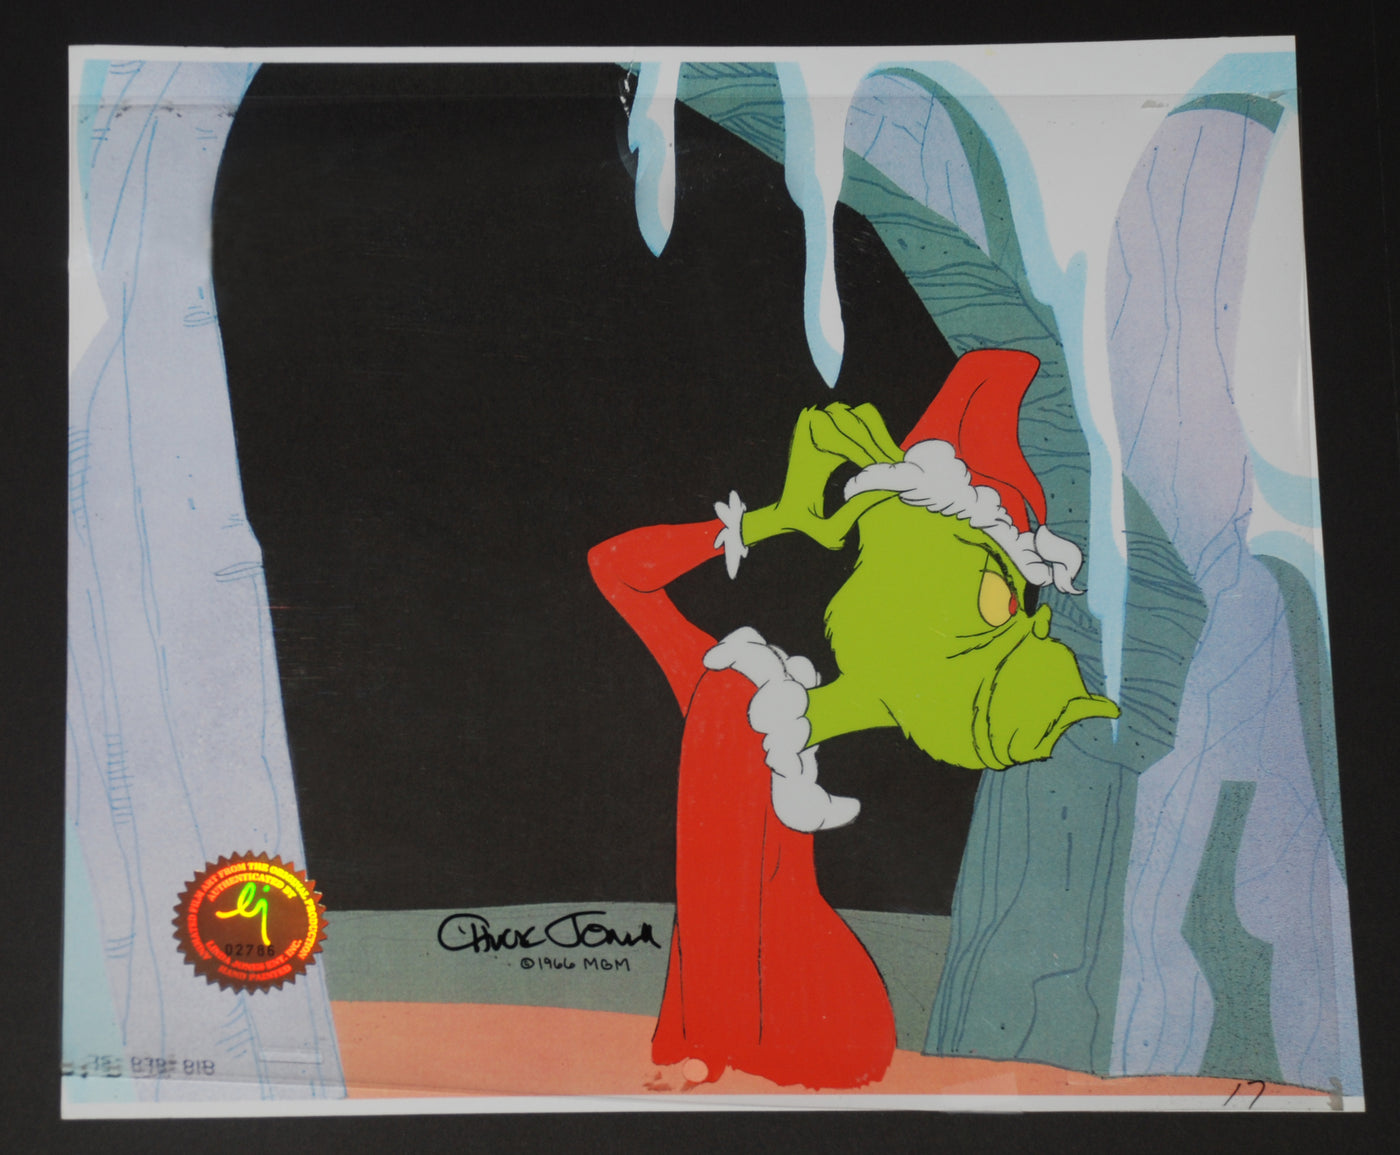 Original Signed Chuck Jones Production Cel of The Grinch from How the Grinch Stole Christmas